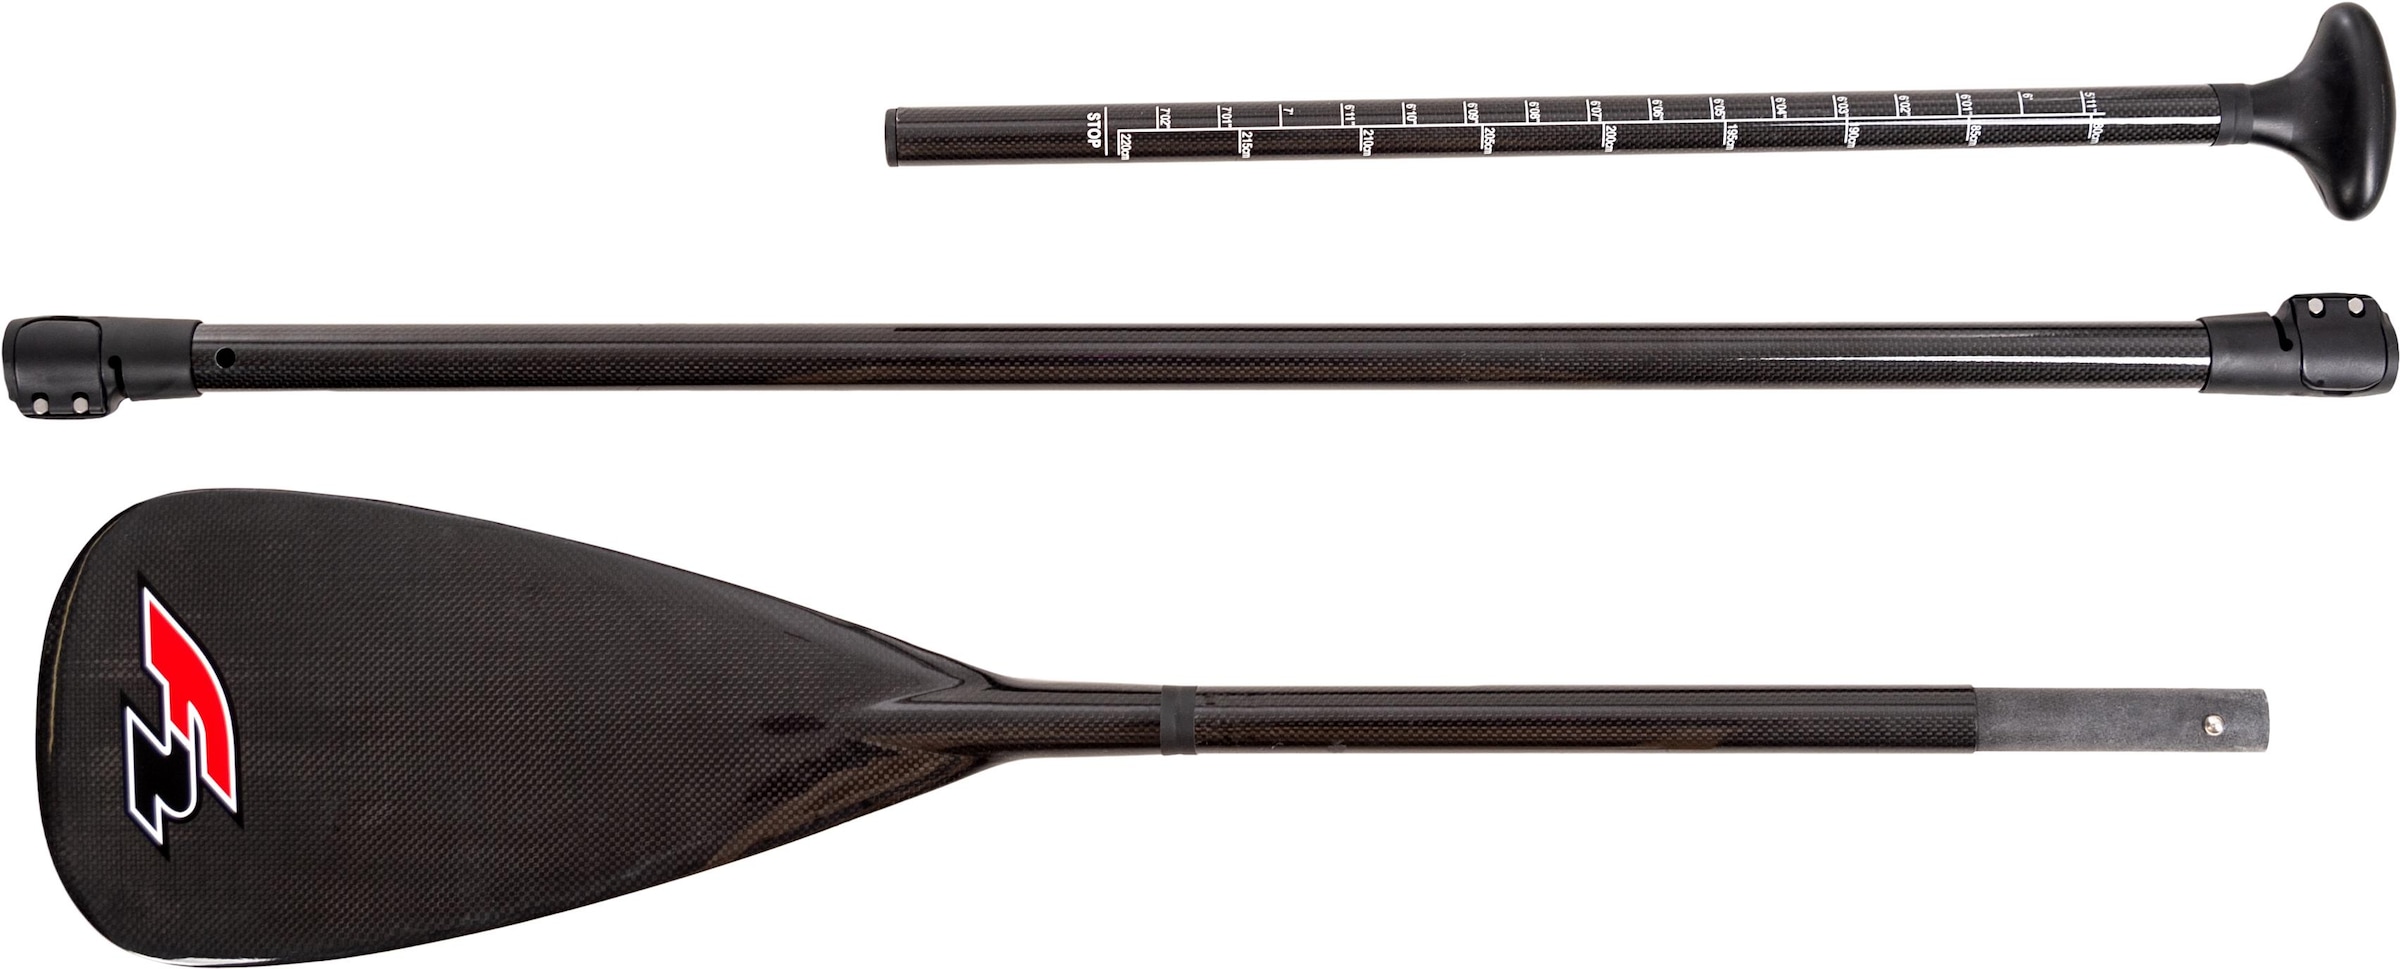 F2 SUP-Paddel » Carbon Paddle Composite 3...